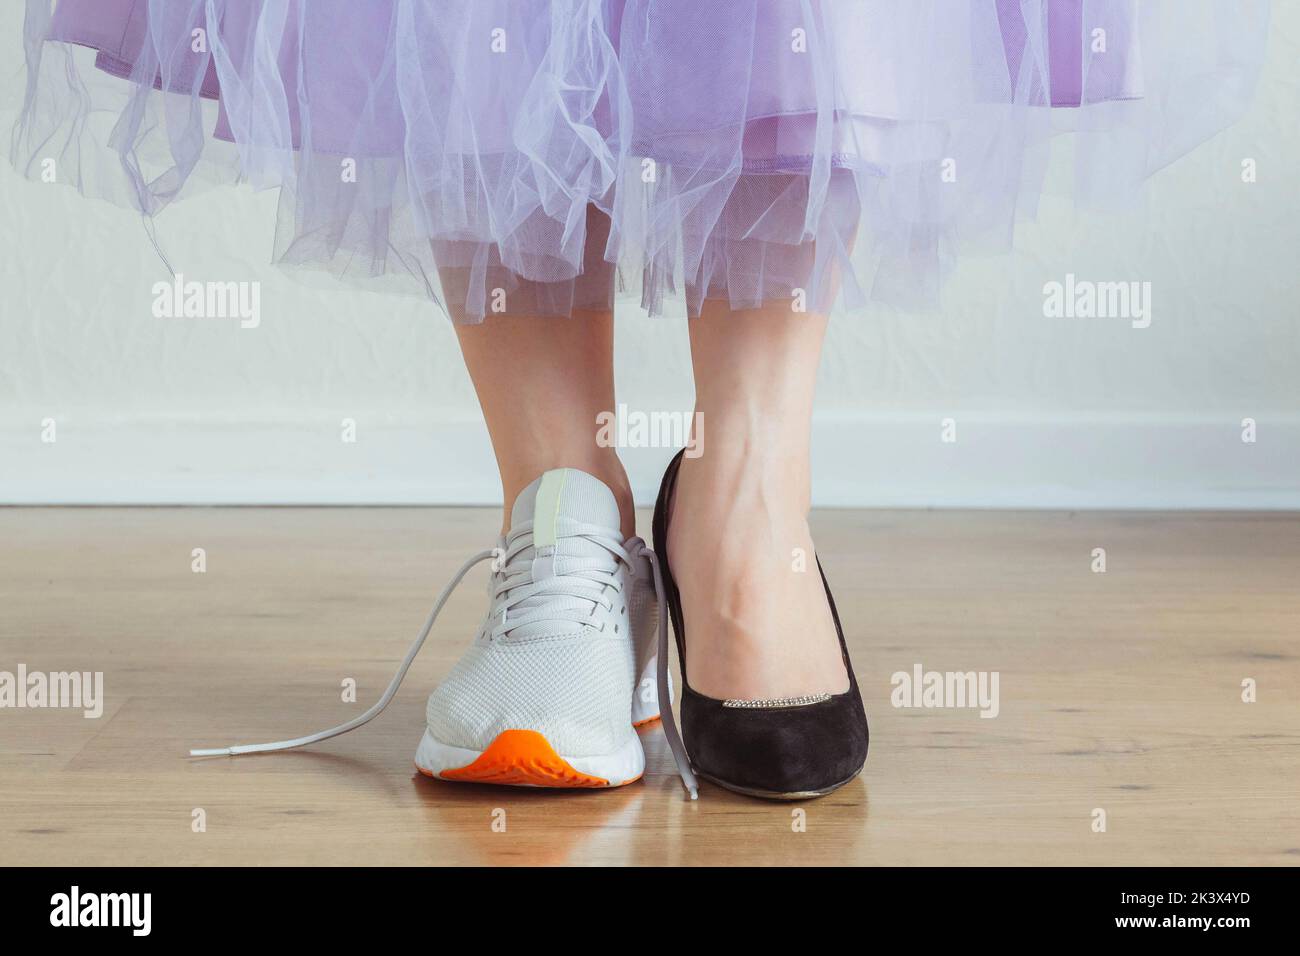 Woman choosing what to wear - sneakers or dress shoes Stock Photo